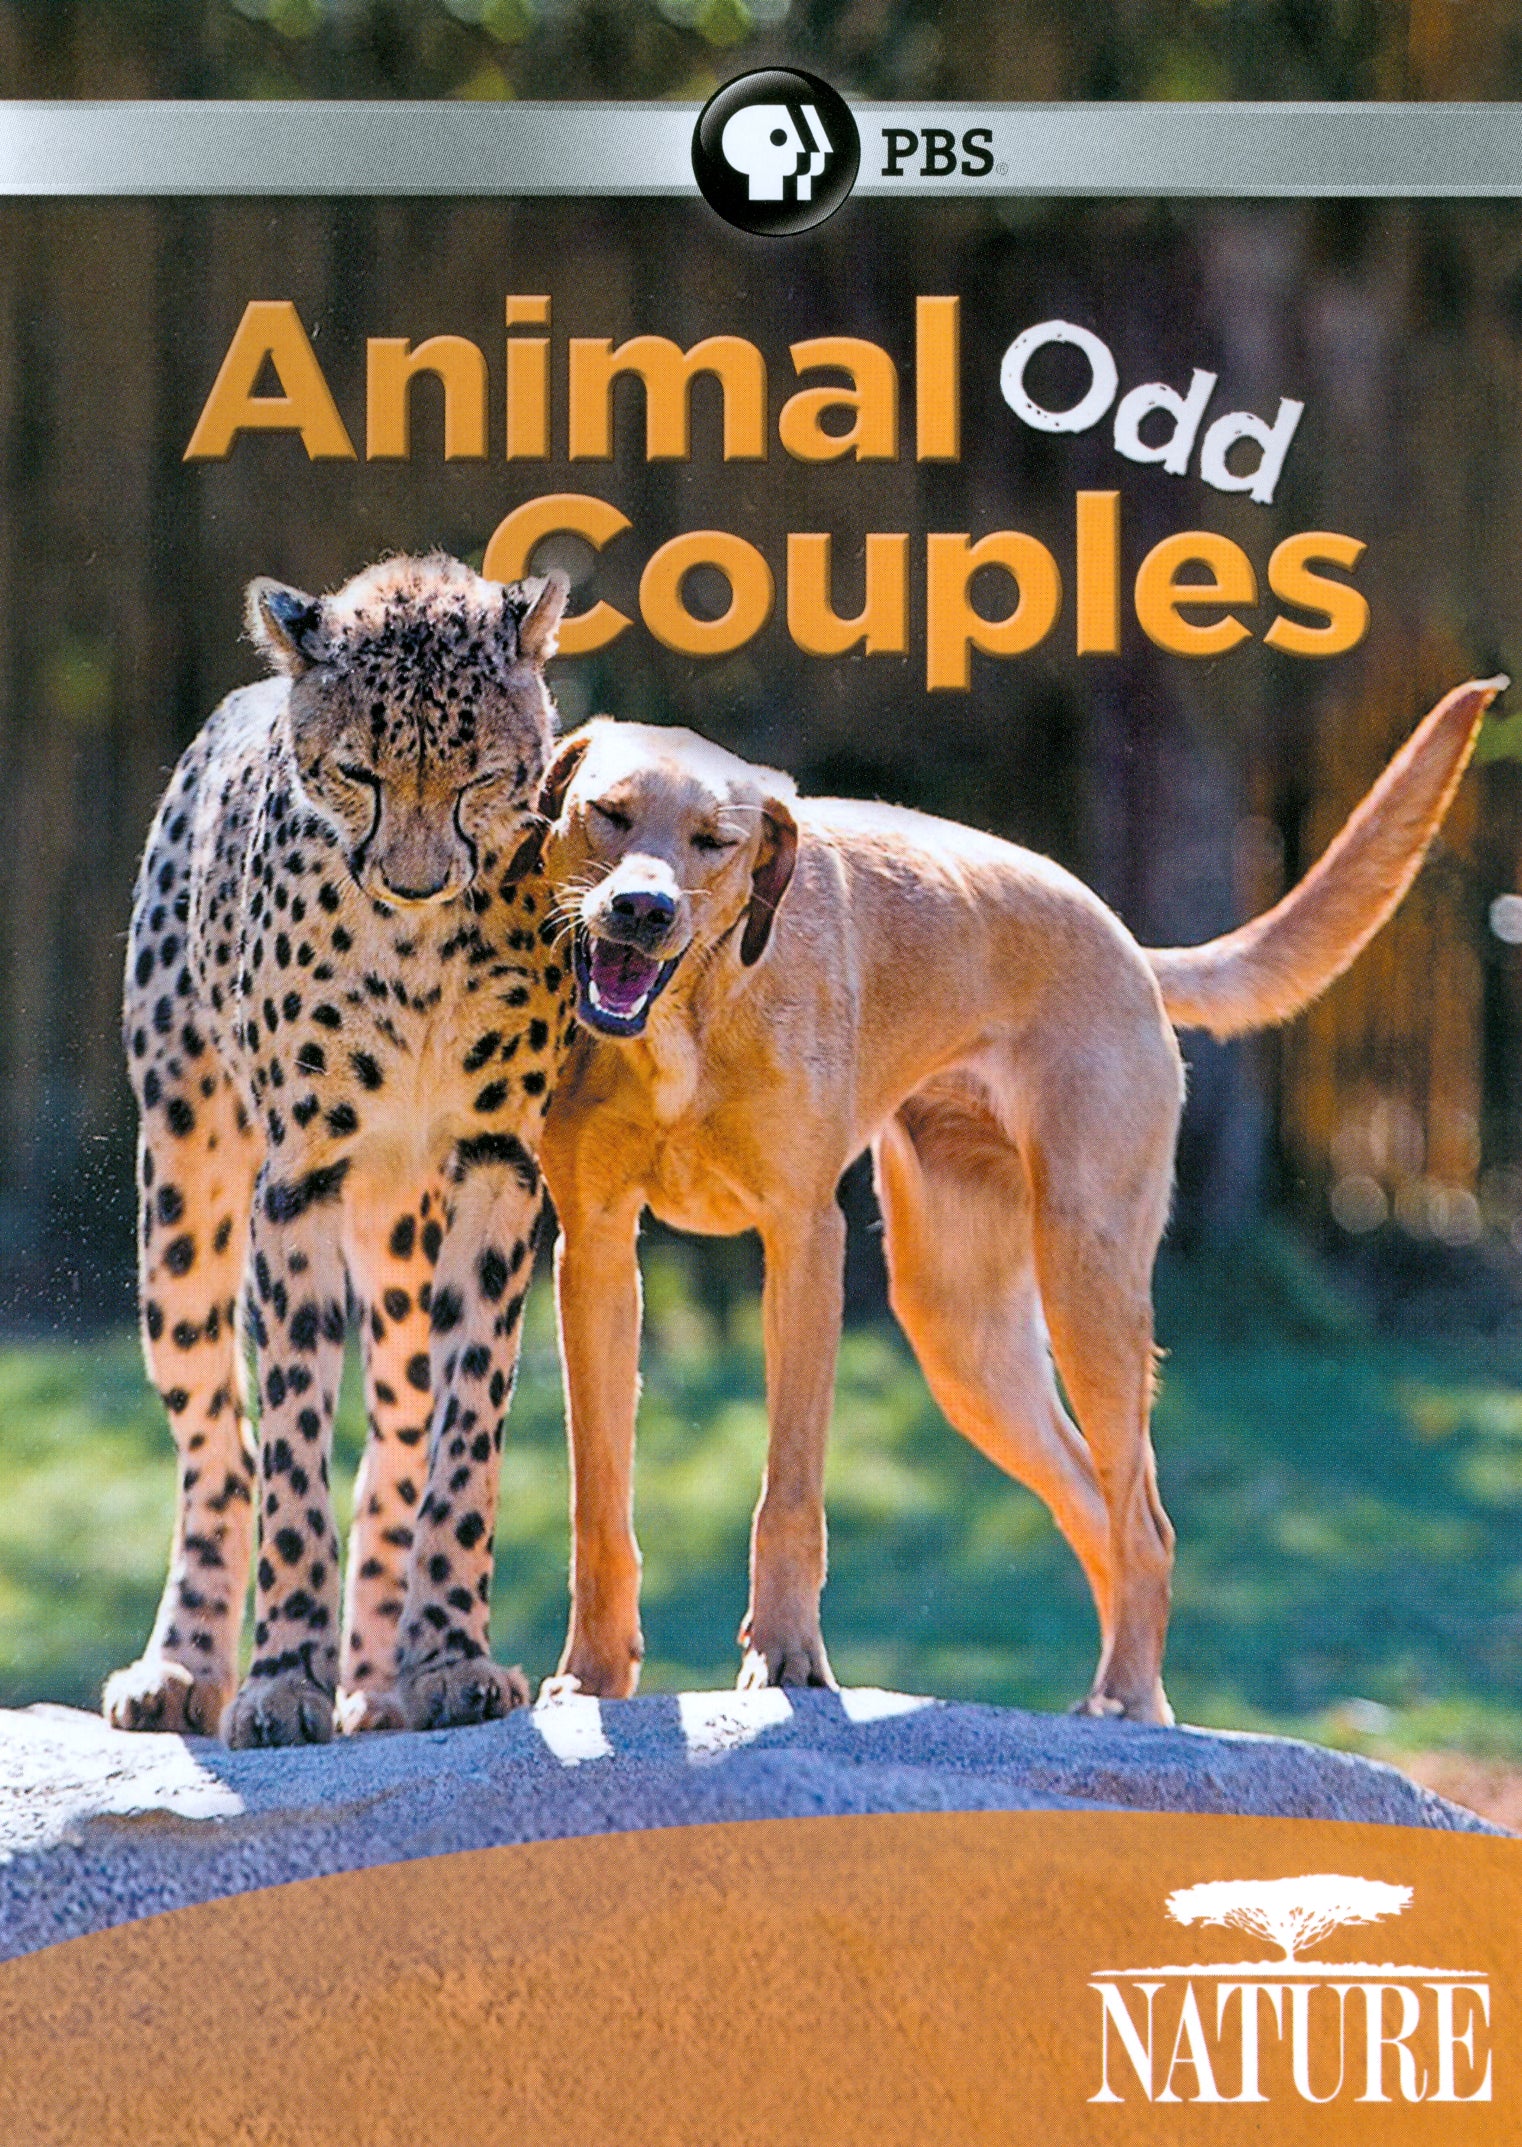 Nature: Animal Odd Couples cover art